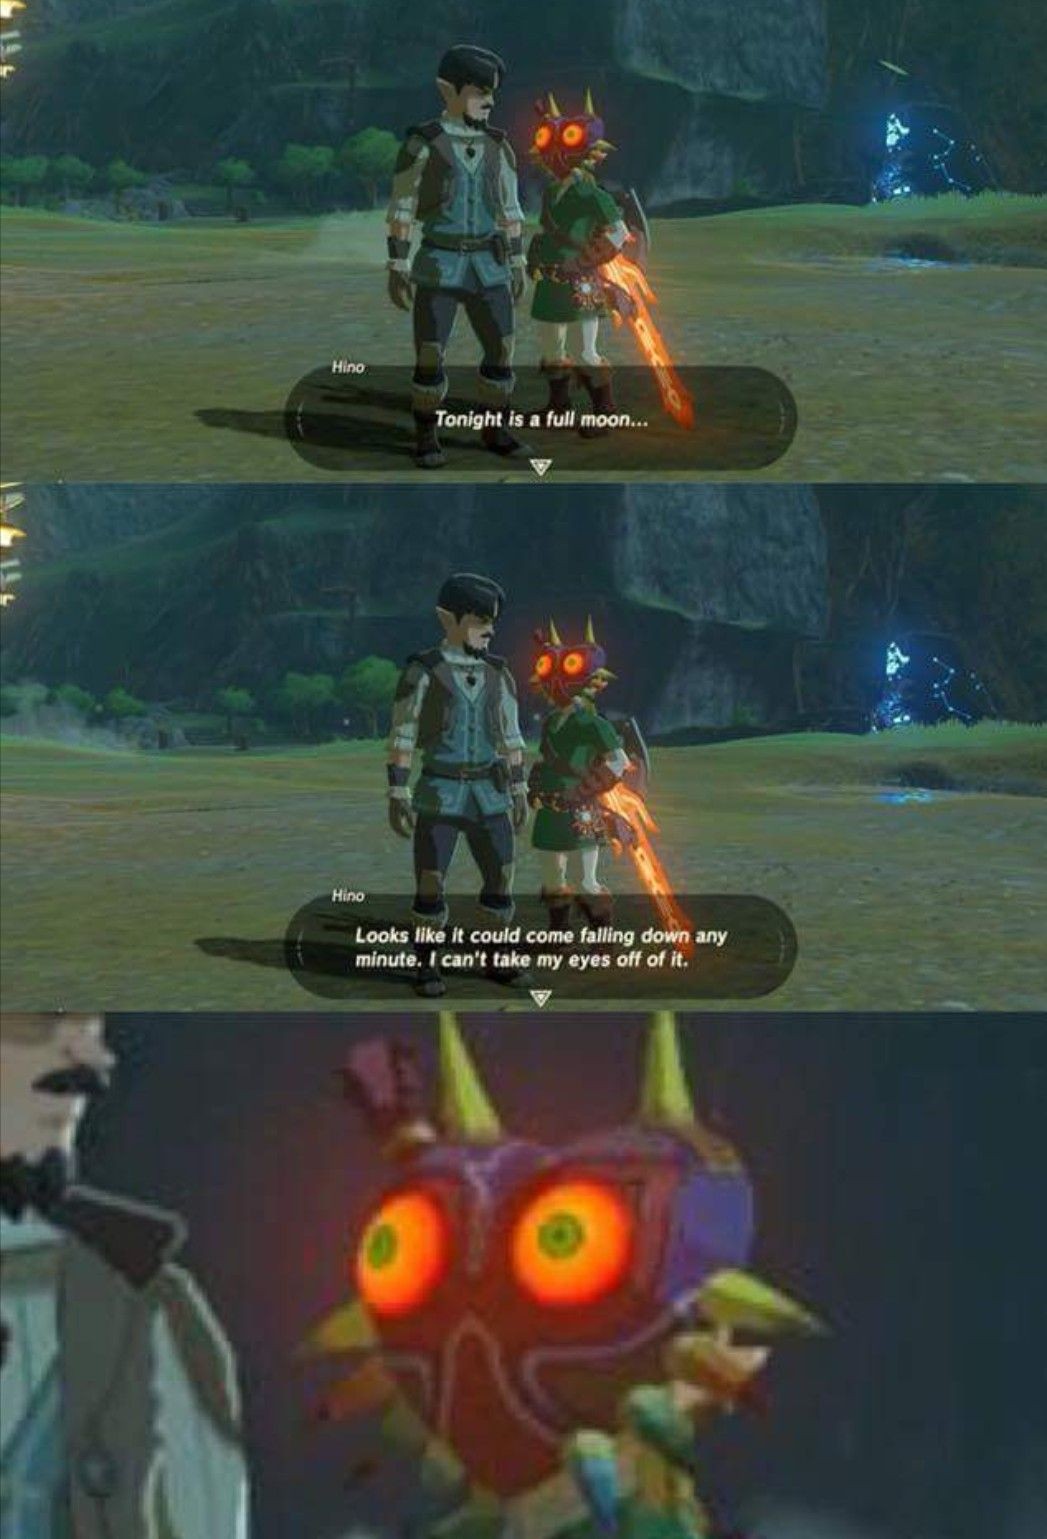 memes - legend of zelda memes - Hino Tonight is a full moon... Looks it could come falling down any minute. I can't take my eyes off of it.